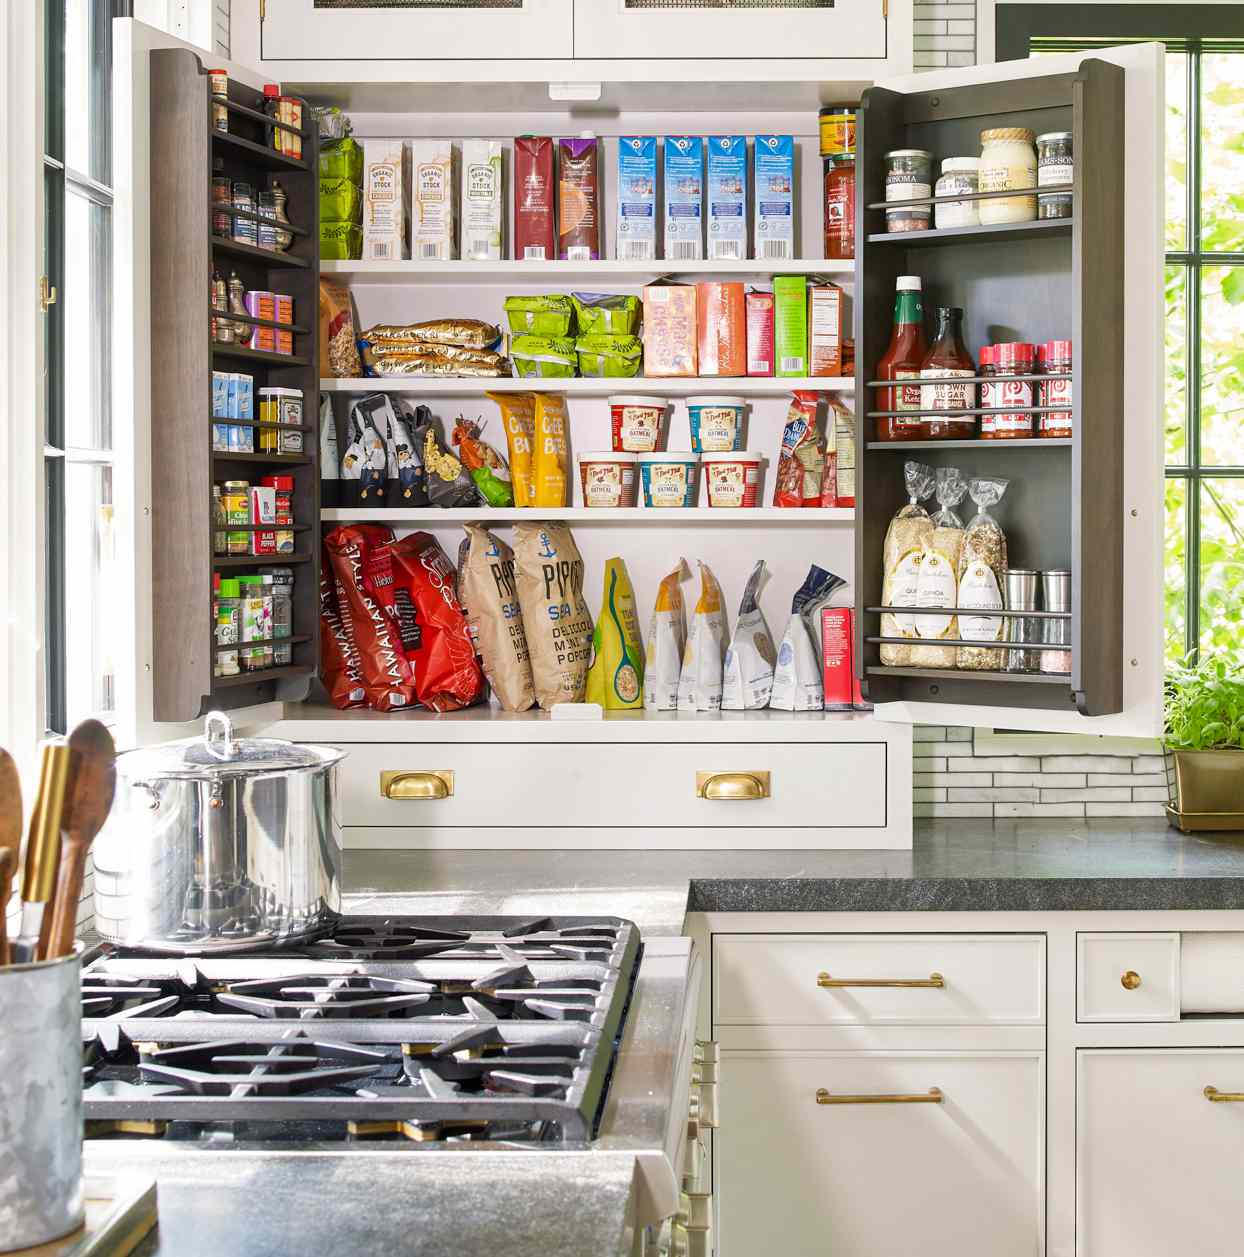 Organizing Kitchen Cabinets, How To Arrange Things In Kitchen Cabinets